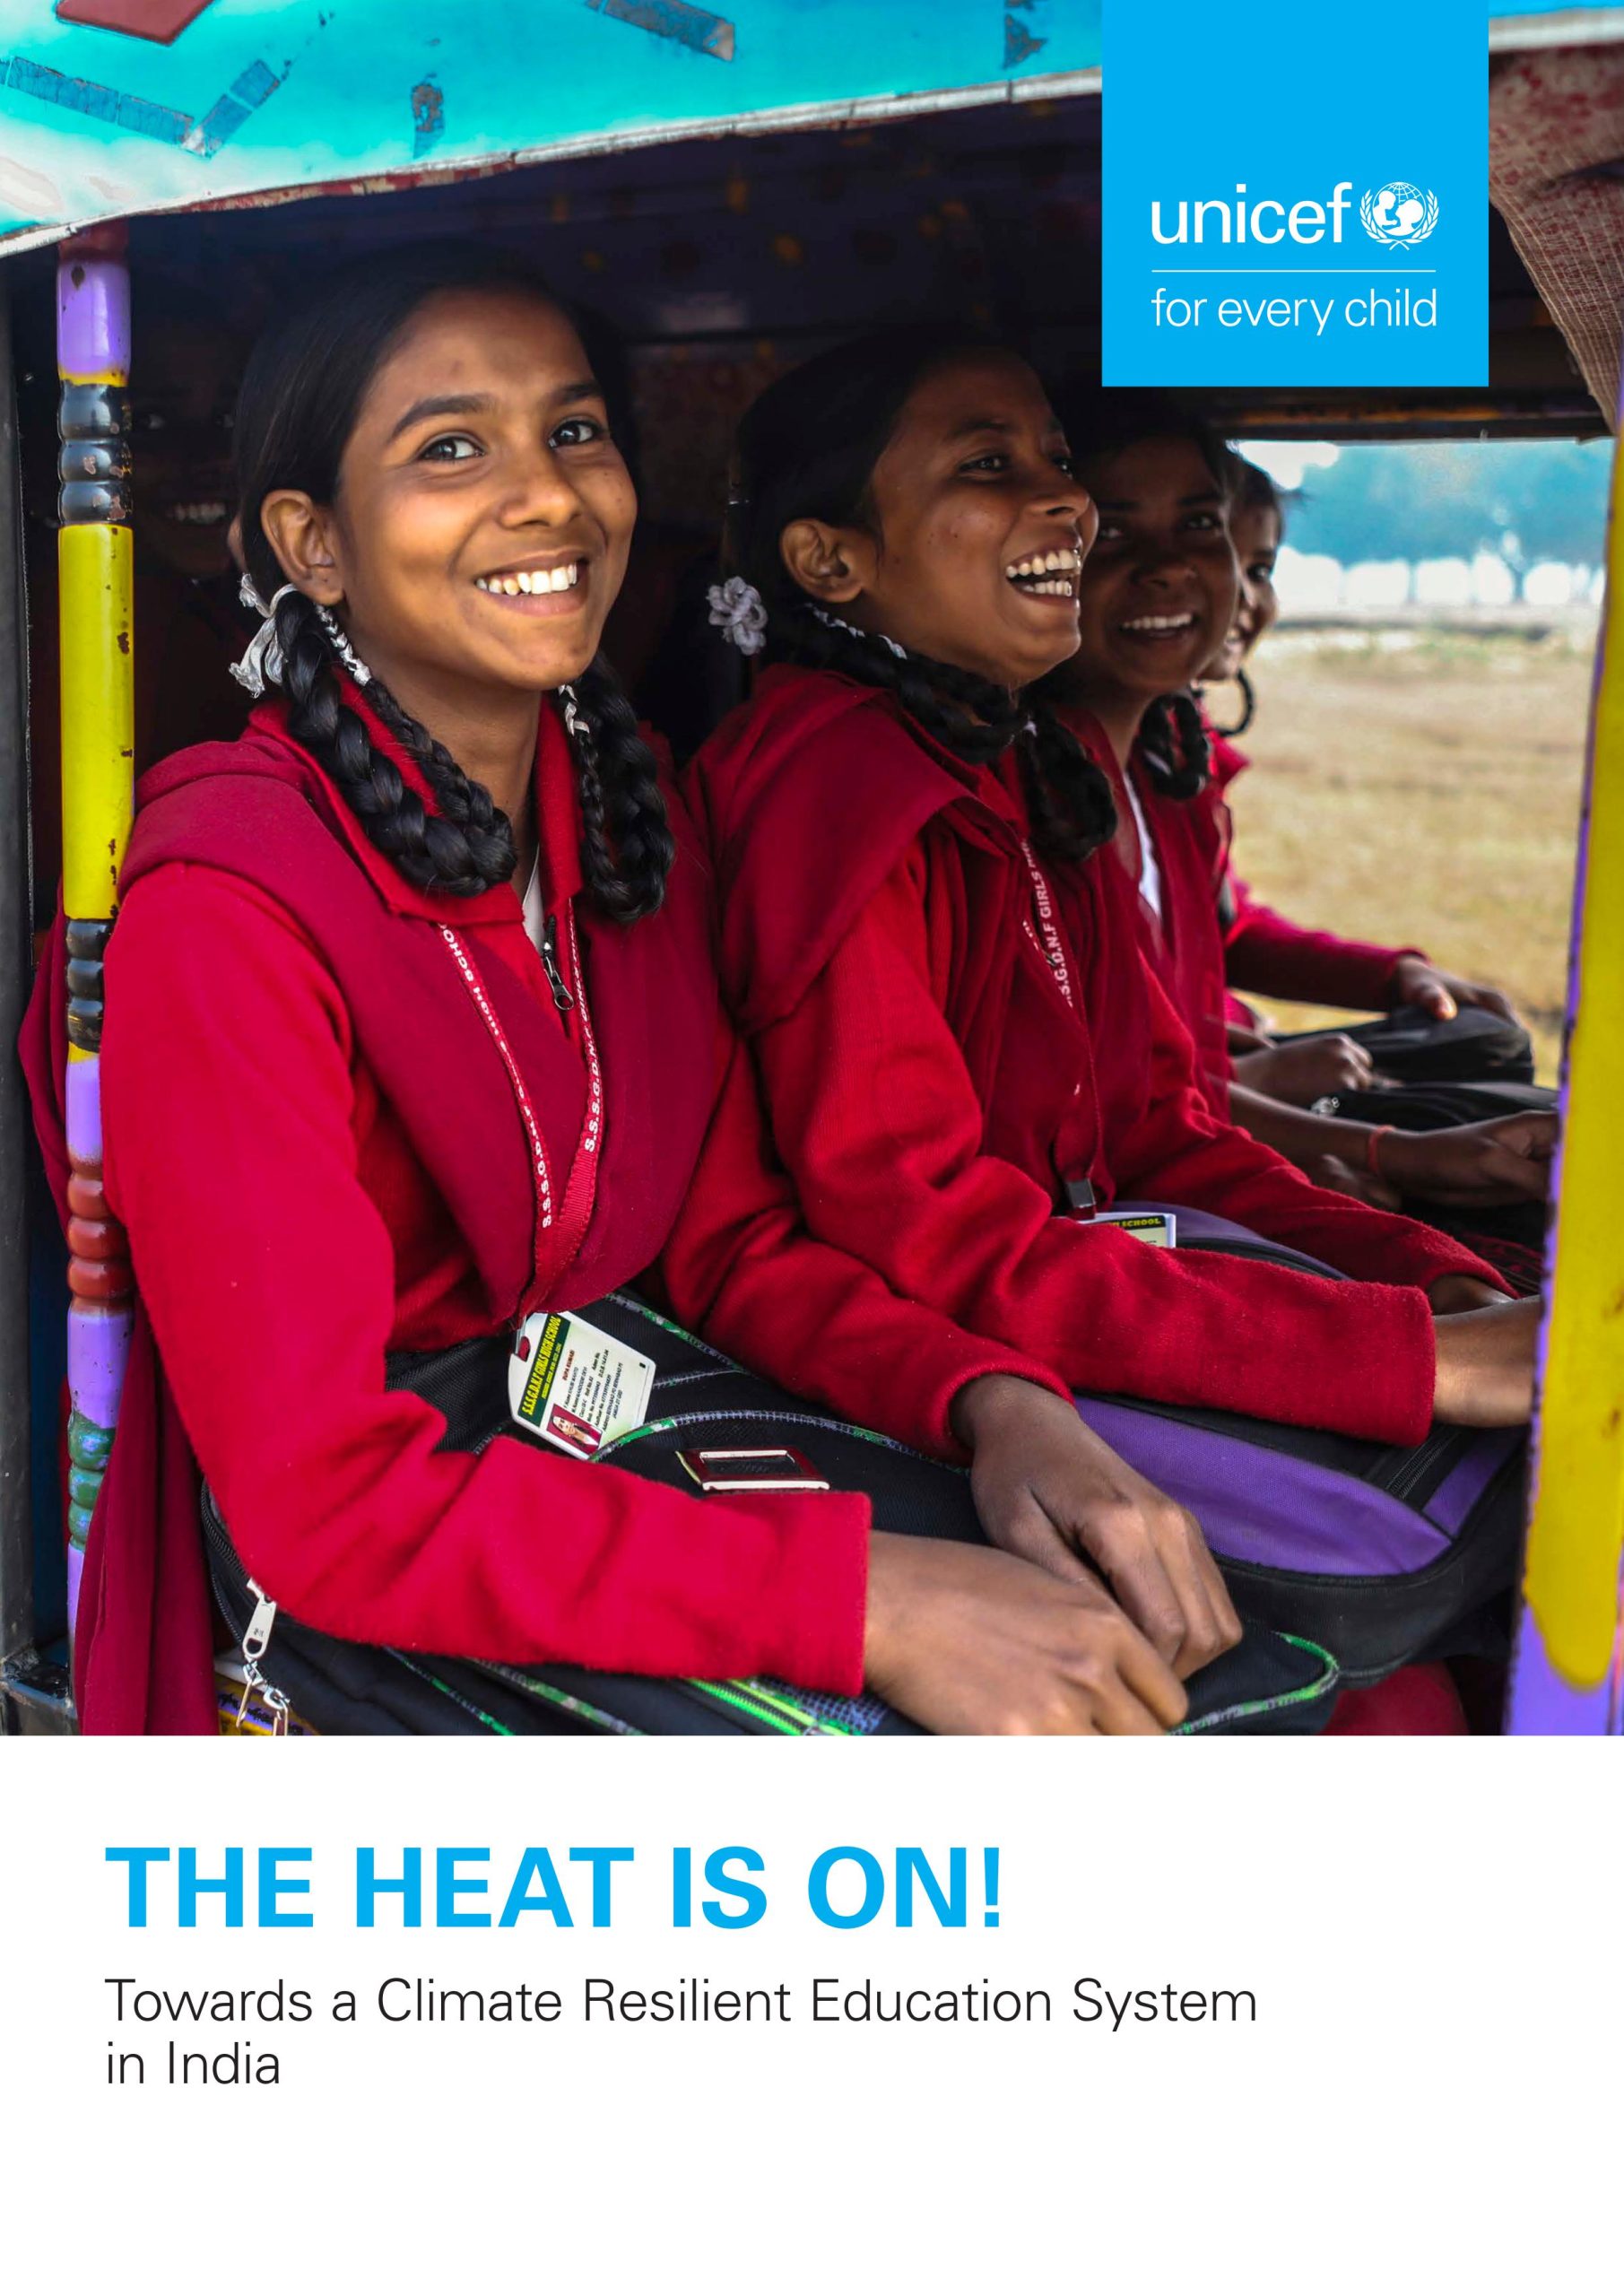 The Heat is On! UNICEF Climate Change and Education Publication Series